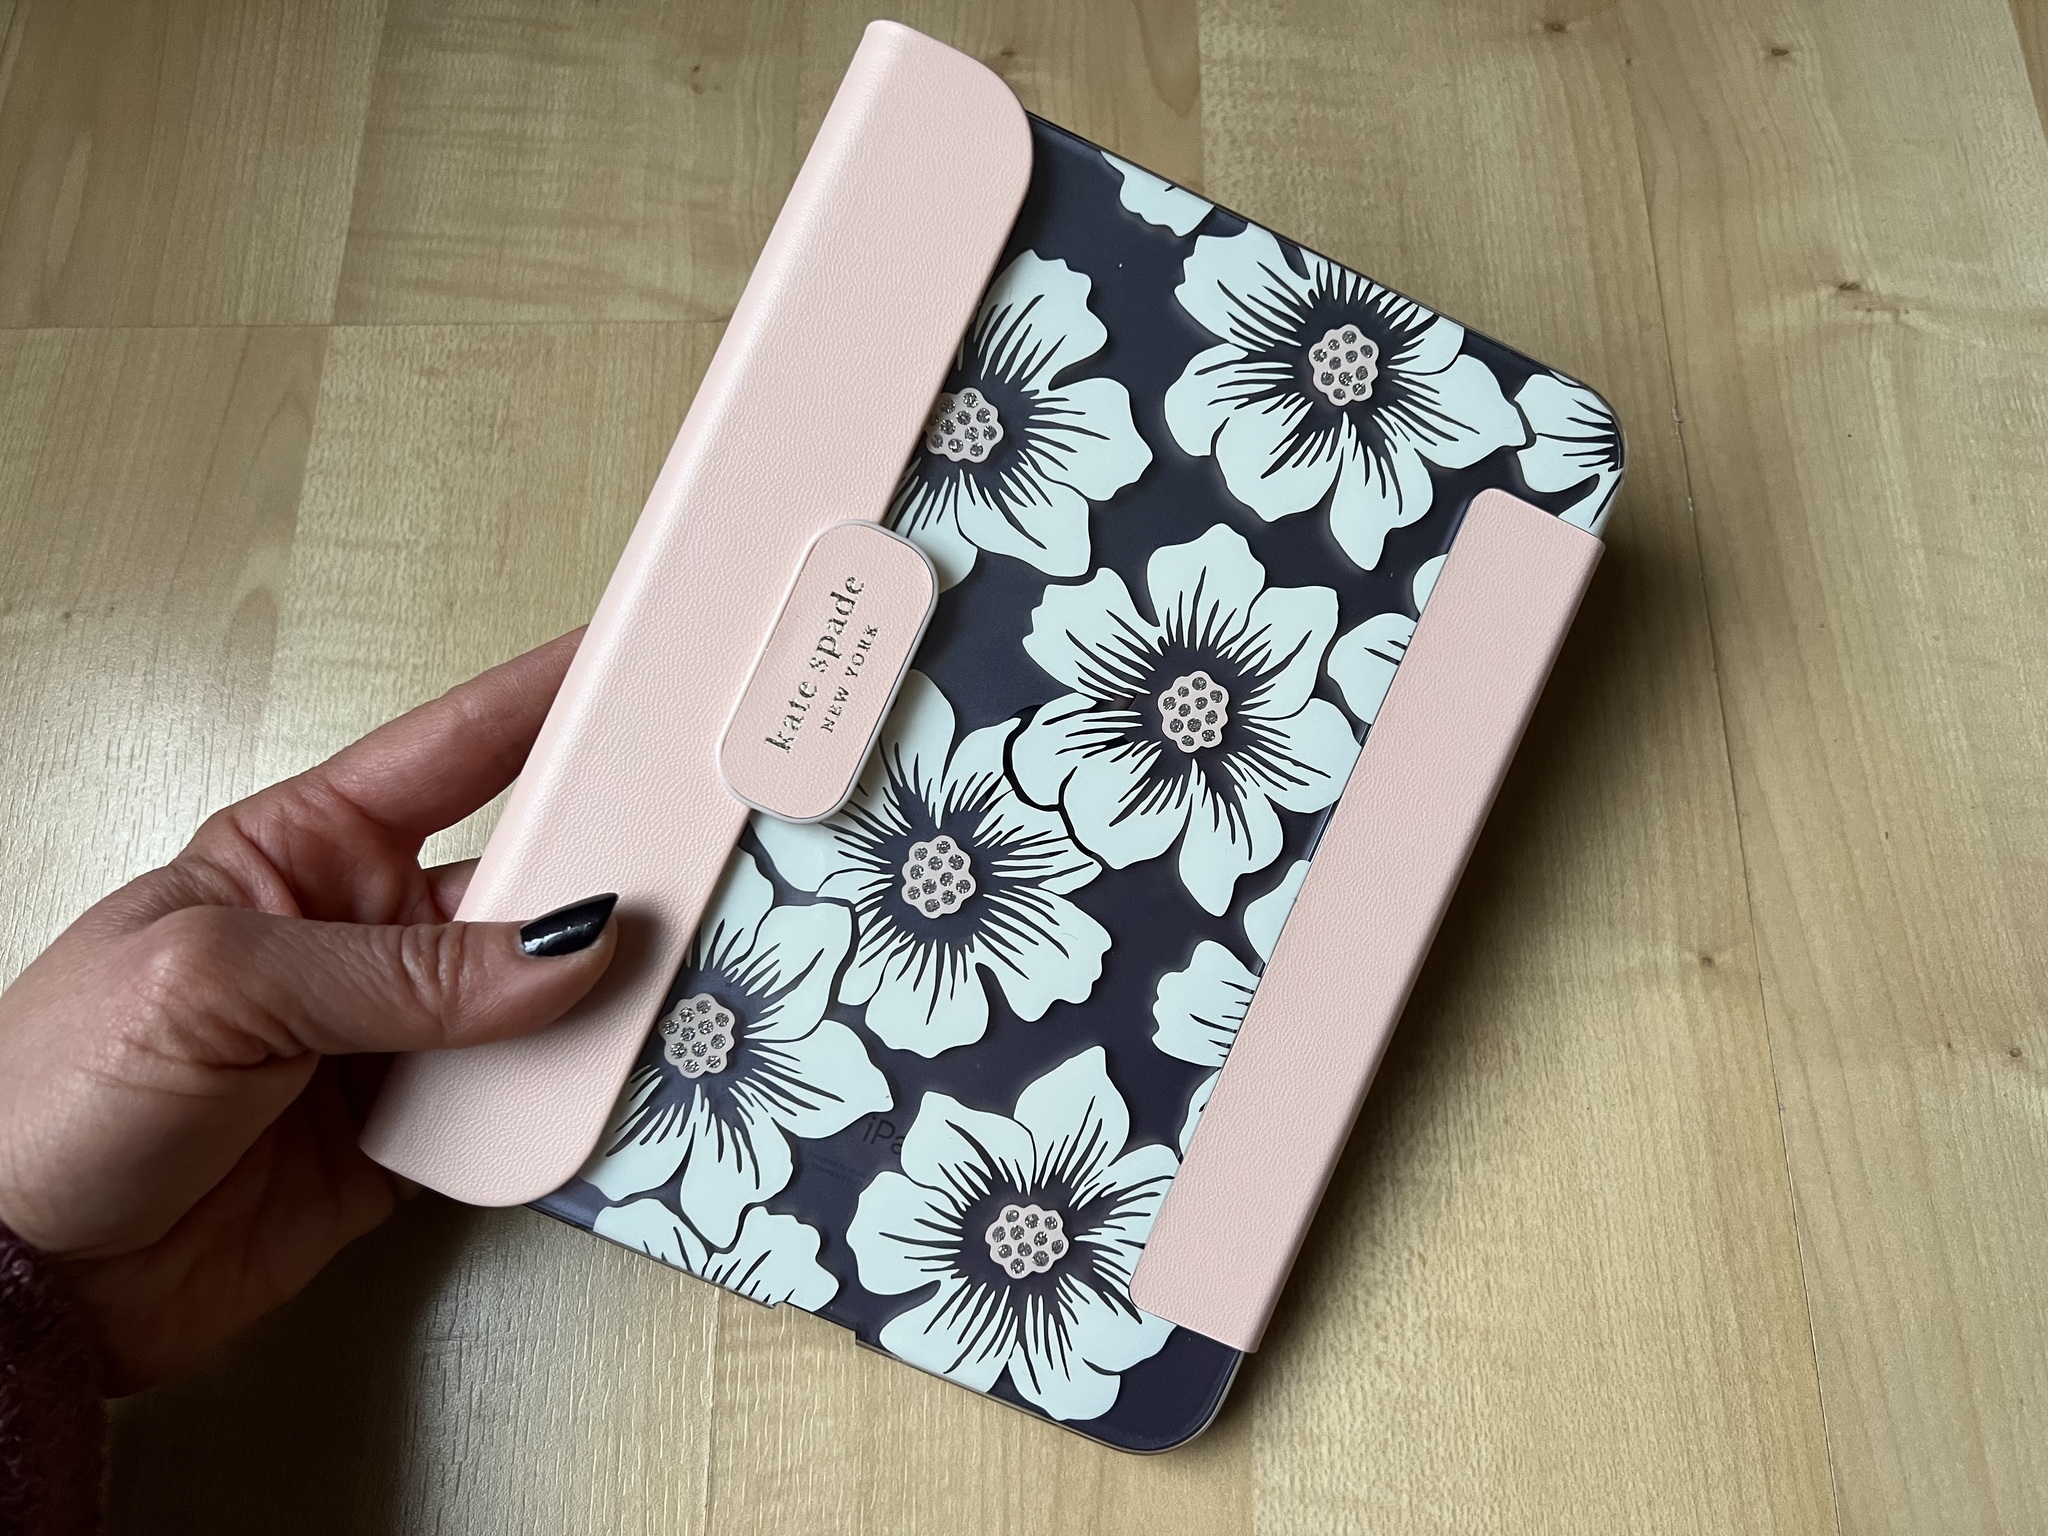 Kate Spade Protective Folio Case review: Stylishly protective | iMore